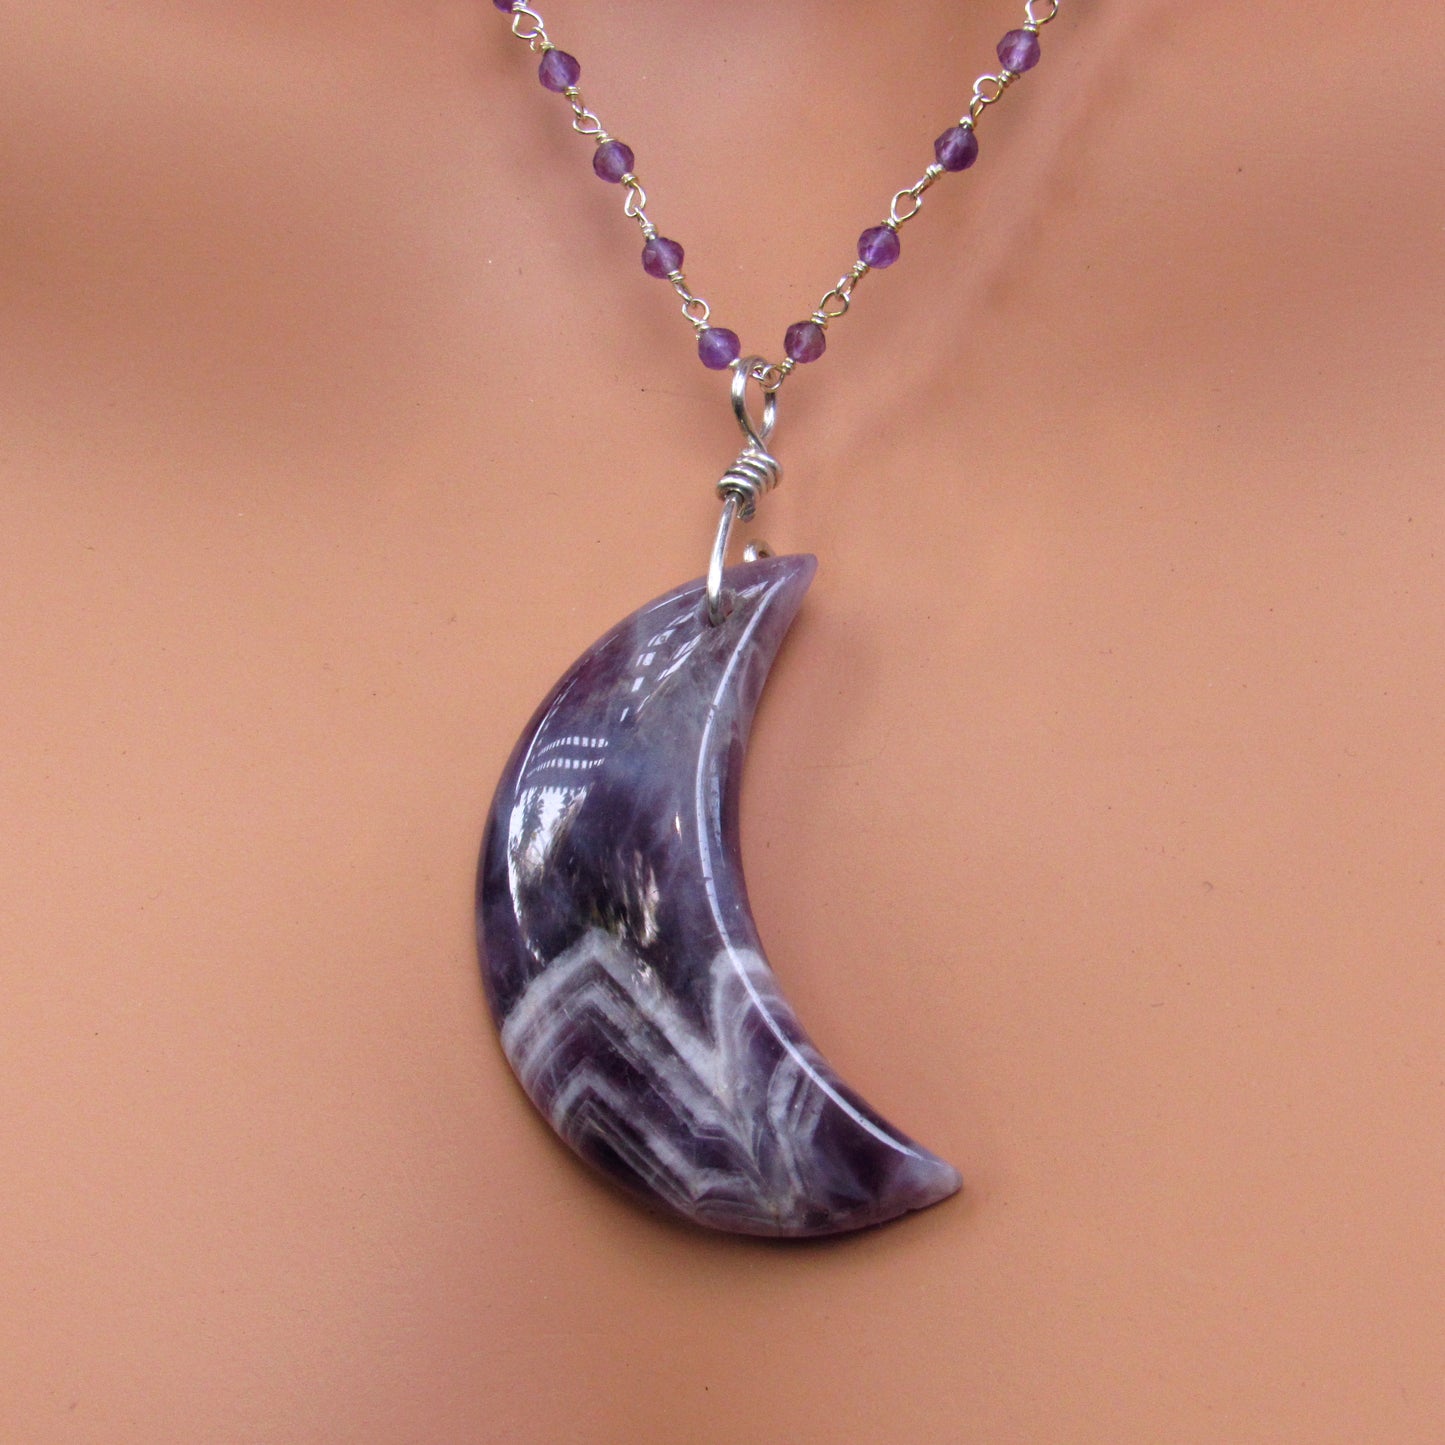 Amethyst Moon on sterling silver wrapped amethyst chain necklace